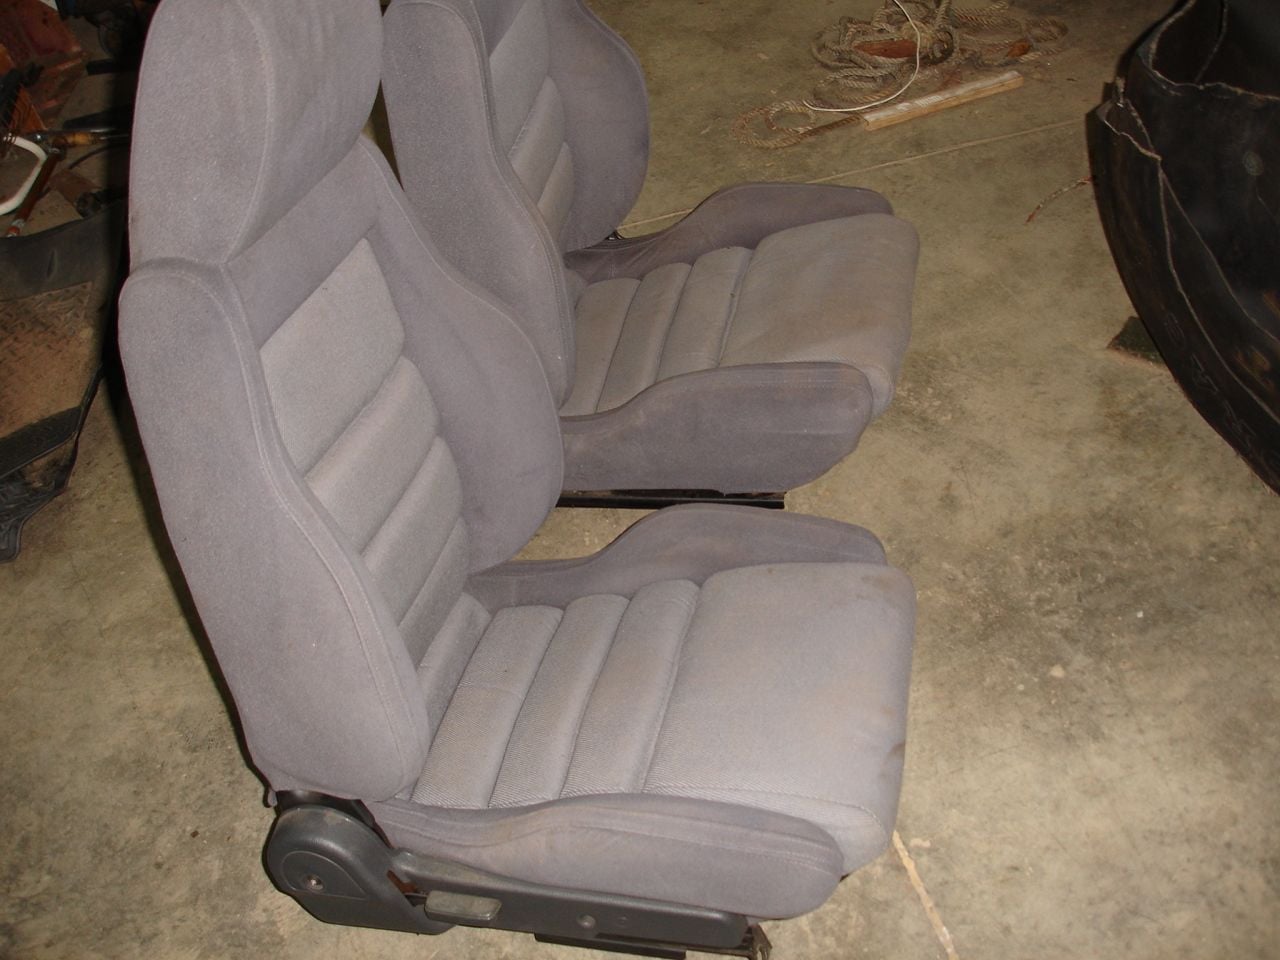 Interior/Upholstery - Cloth Seats for 1987 RX7 , excellent condition - Used - 1986 to 1988 Mazda RX-7 - Raleigh, NC 27502, United States